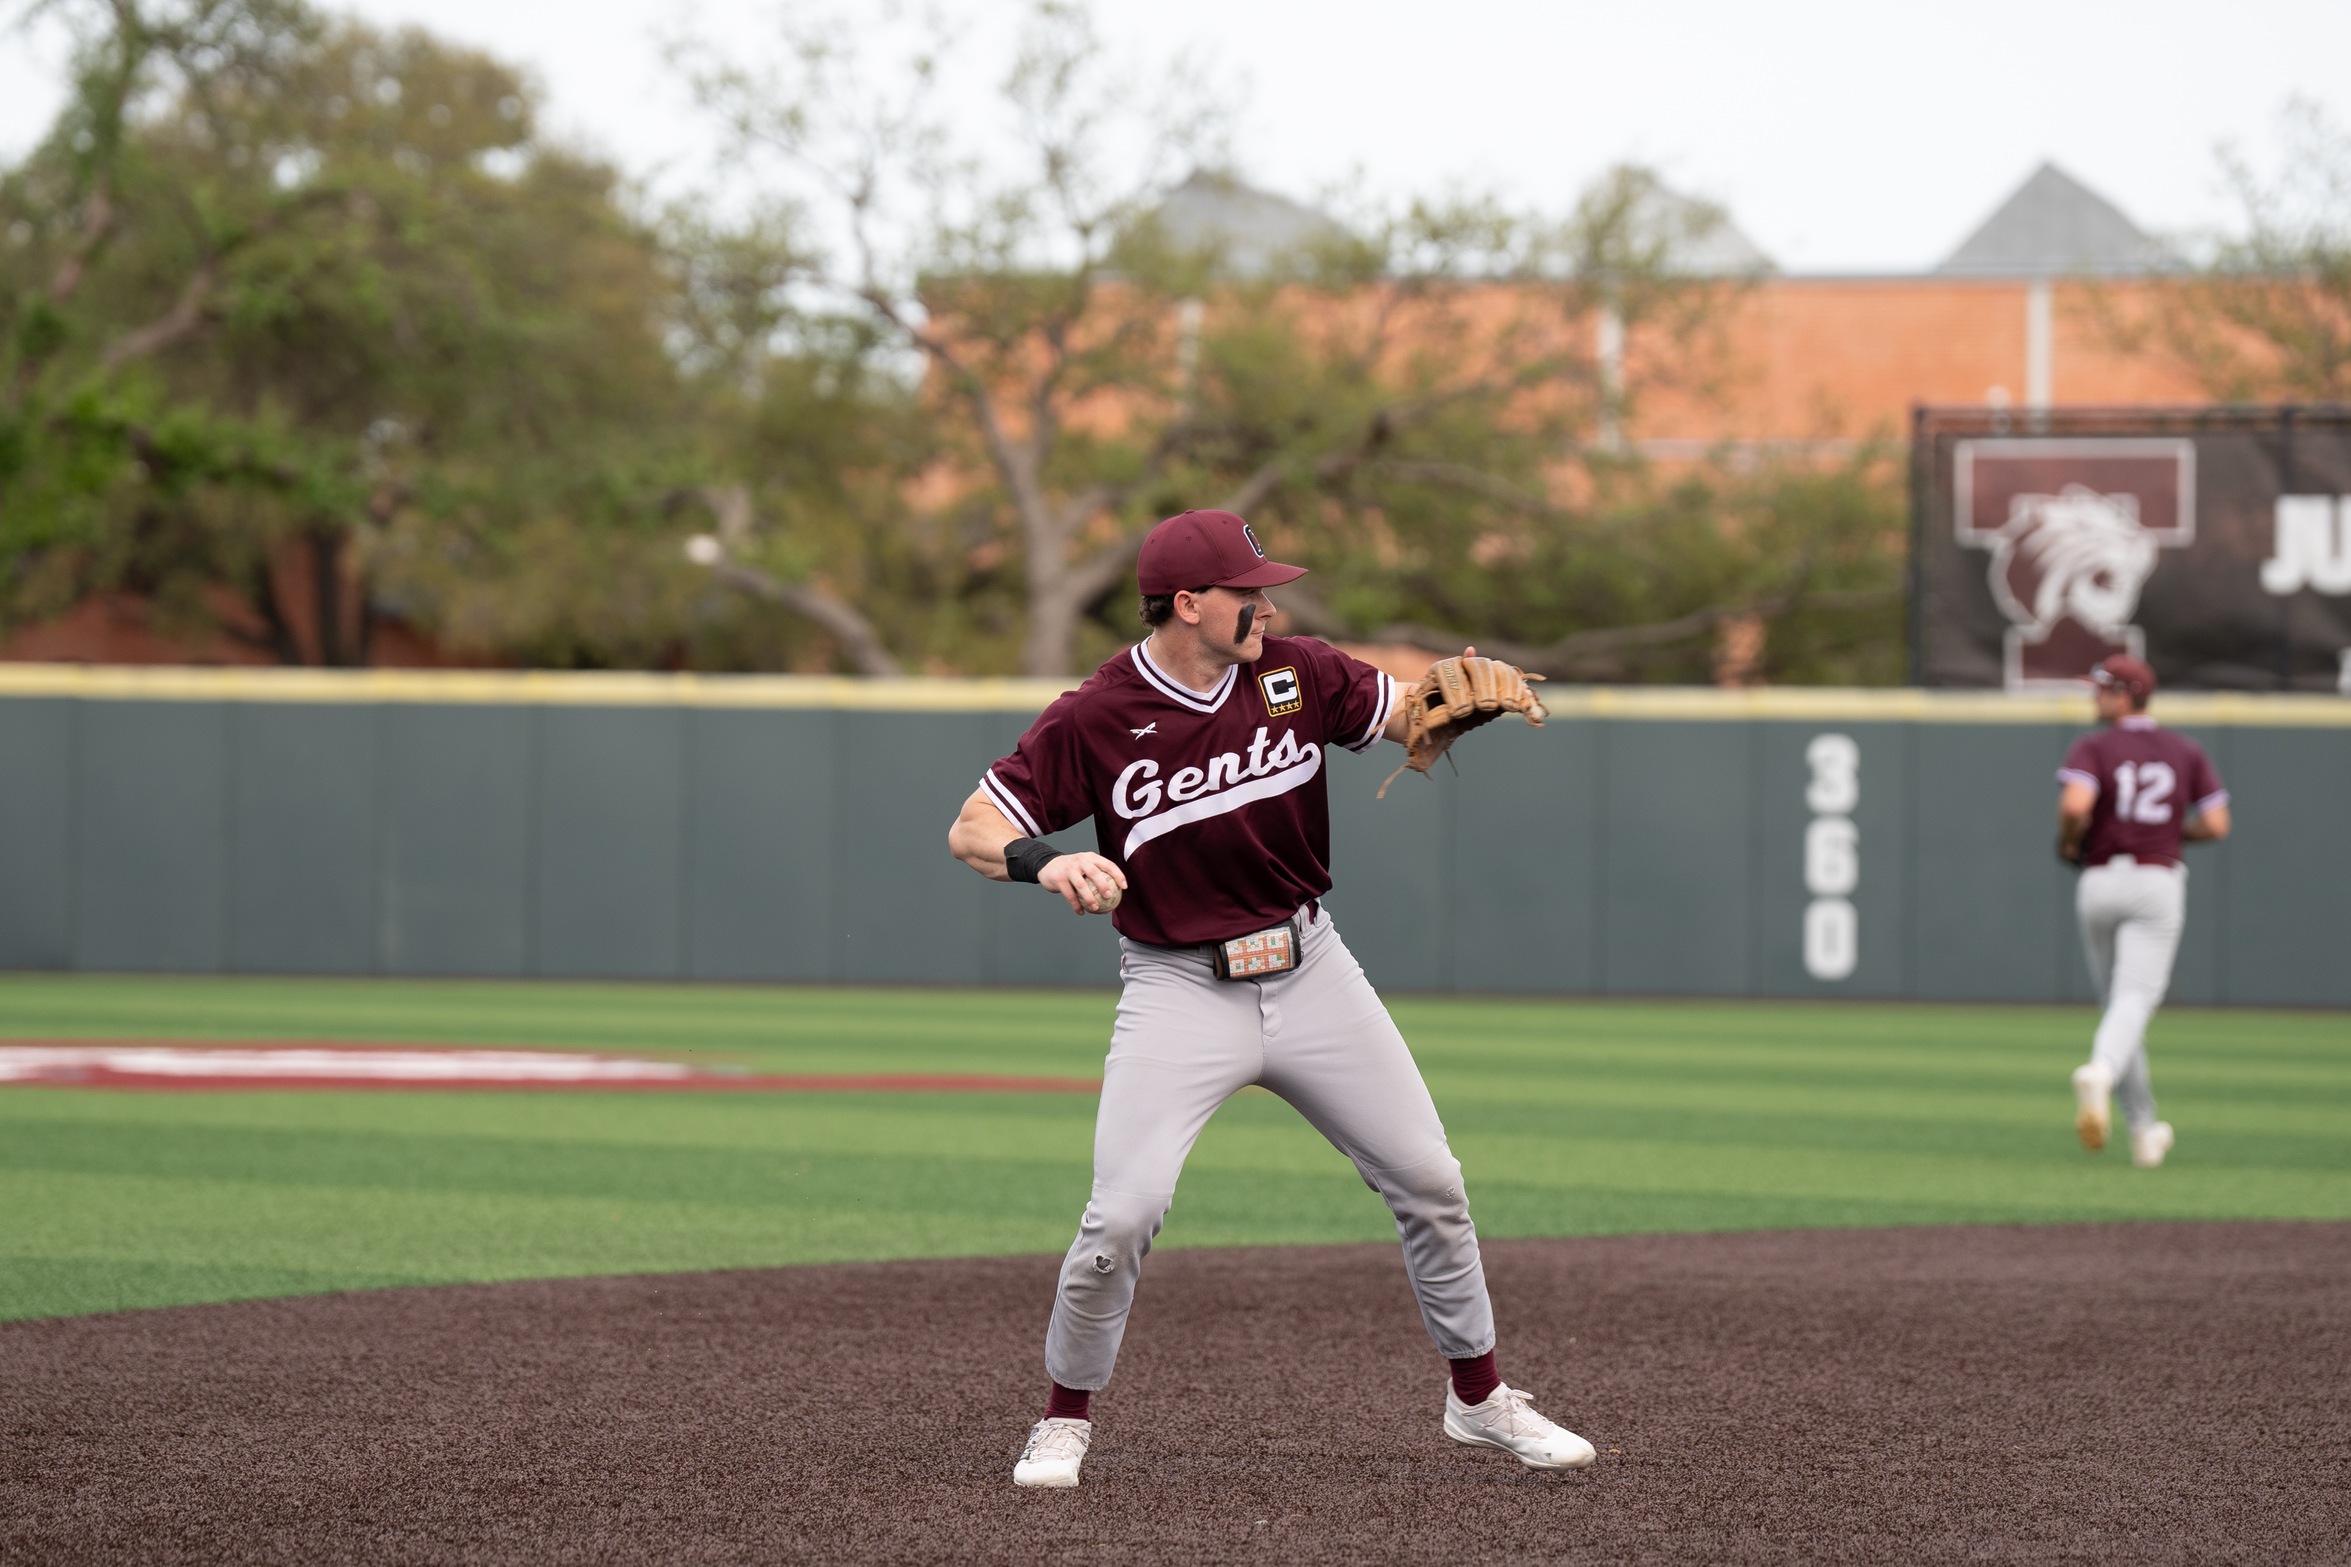 The Diamond Gents will face the Southwestern University Pirates at home this weekend.